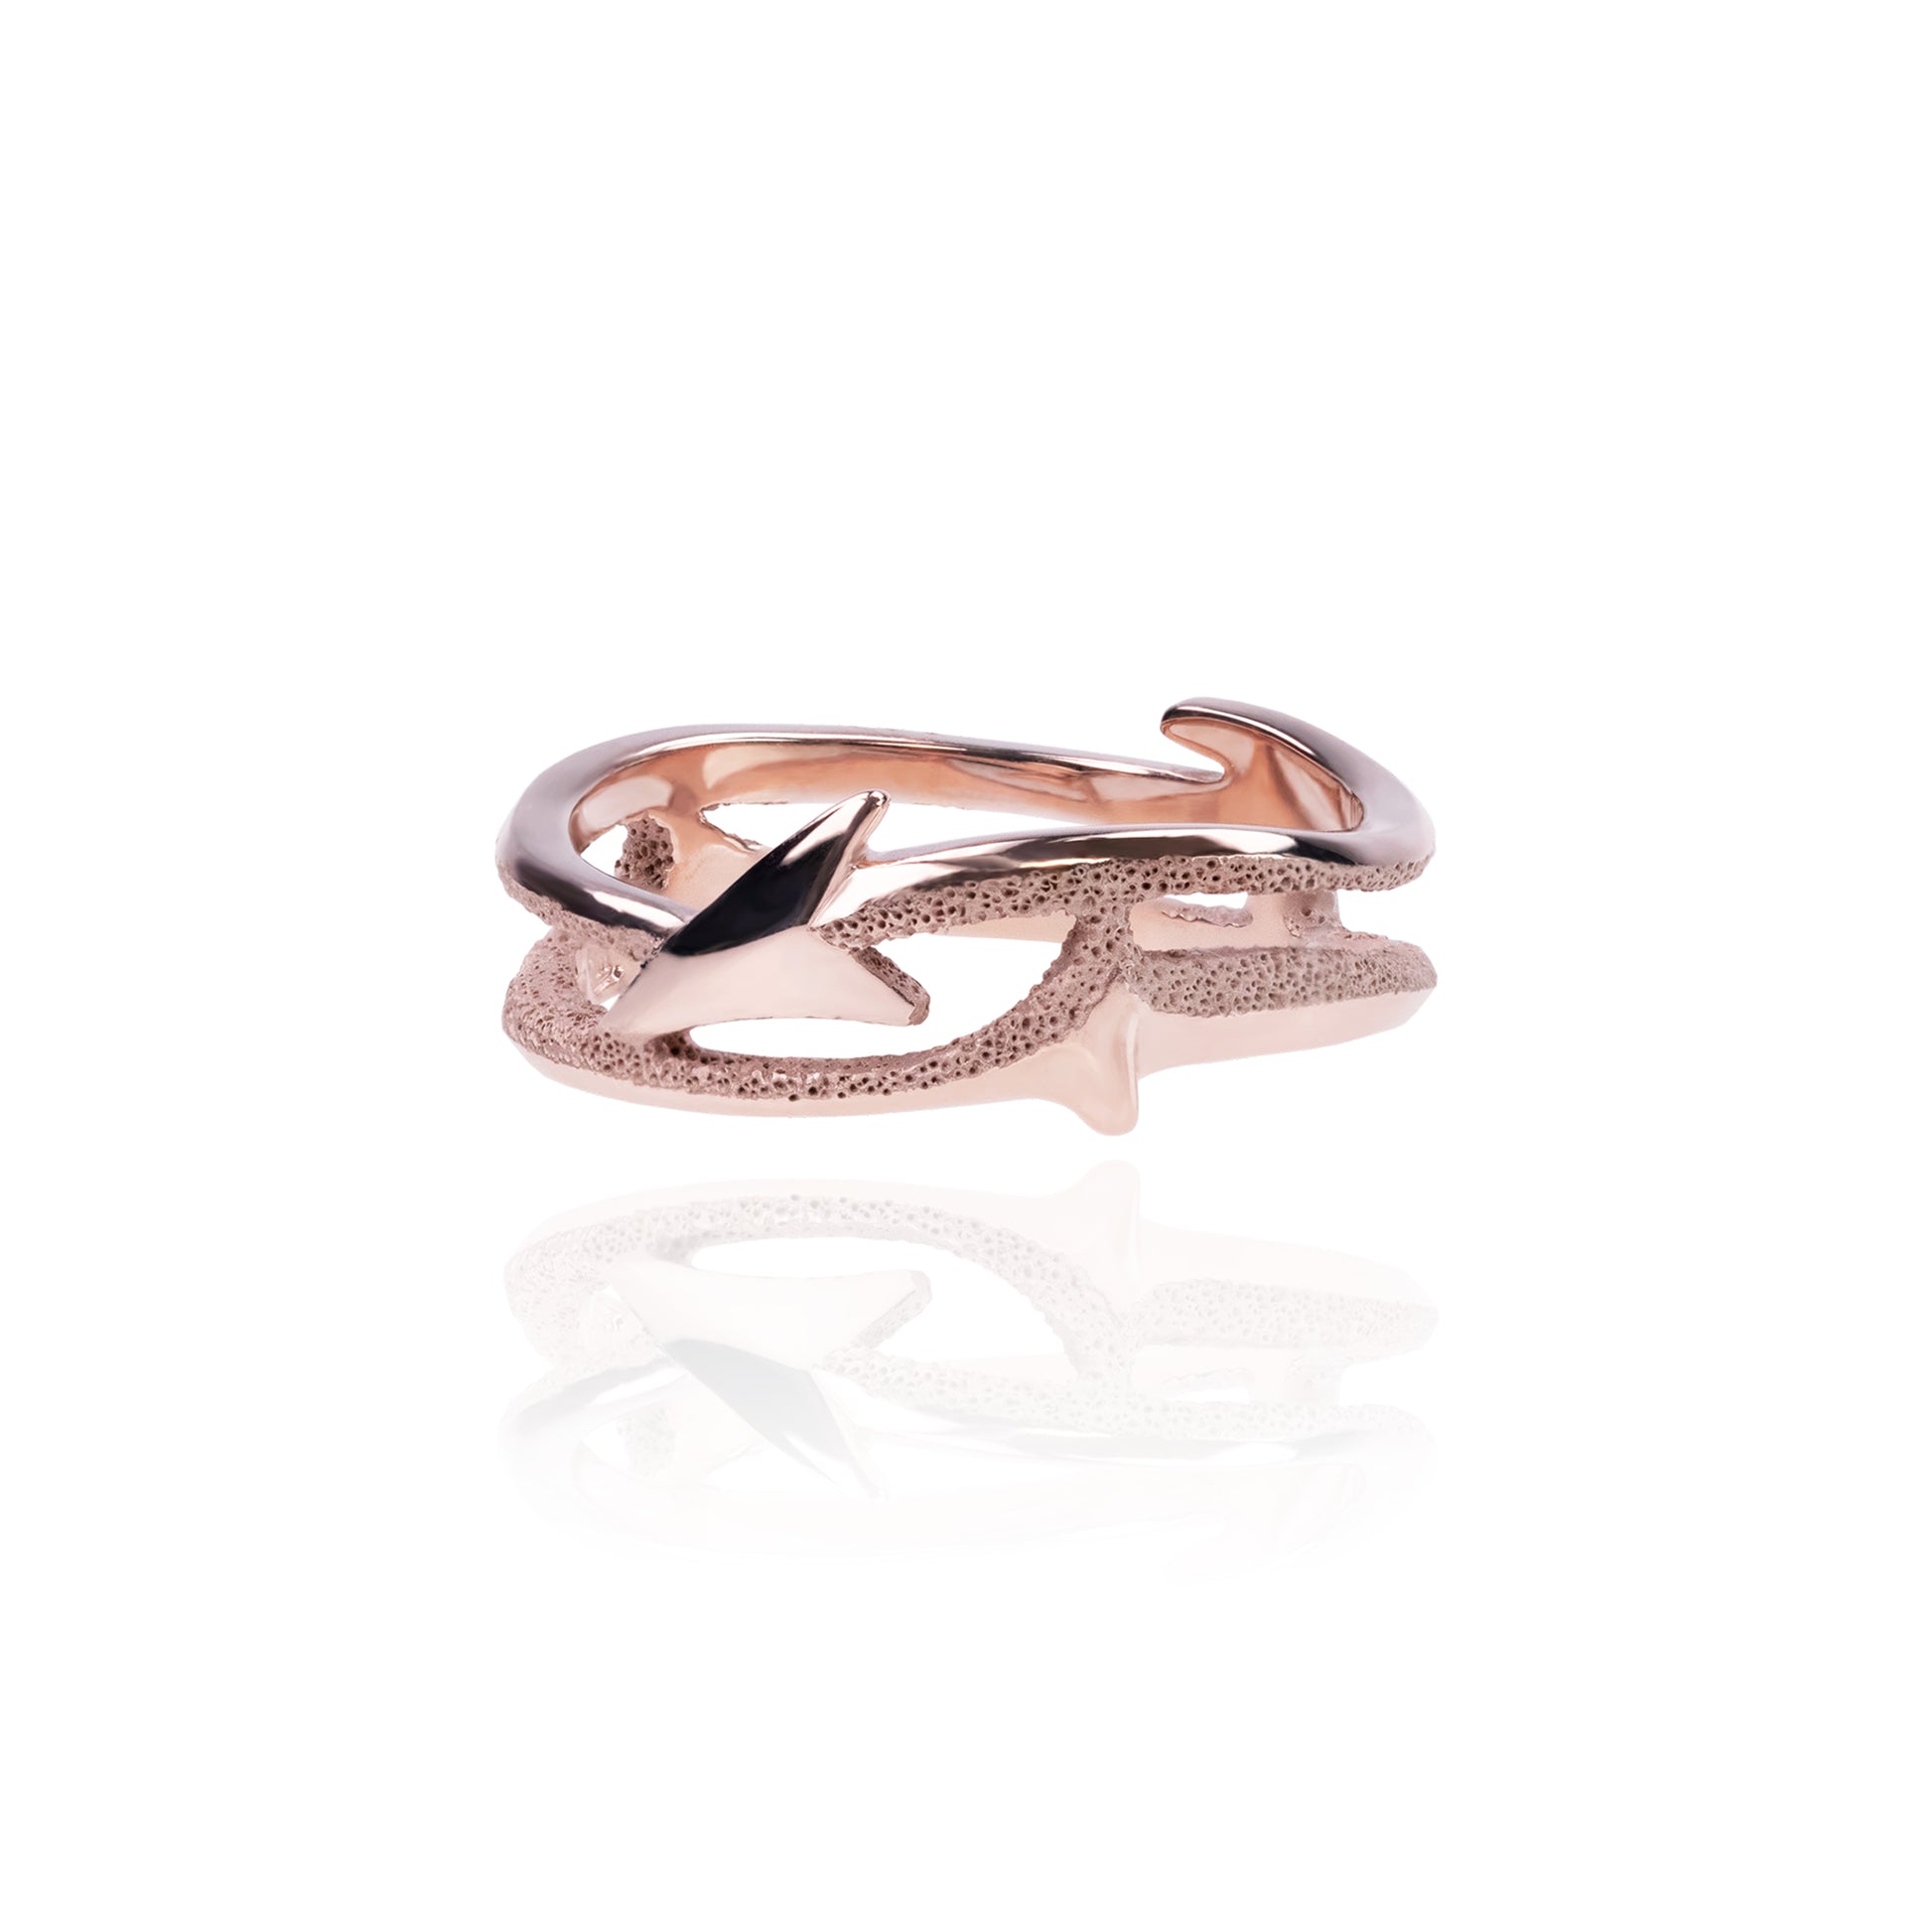 Orme-Brown Contemporary Fine Jewellery Ethical double band wedding band or everyday ring in recycled 9ct rose gold with mixed finishes